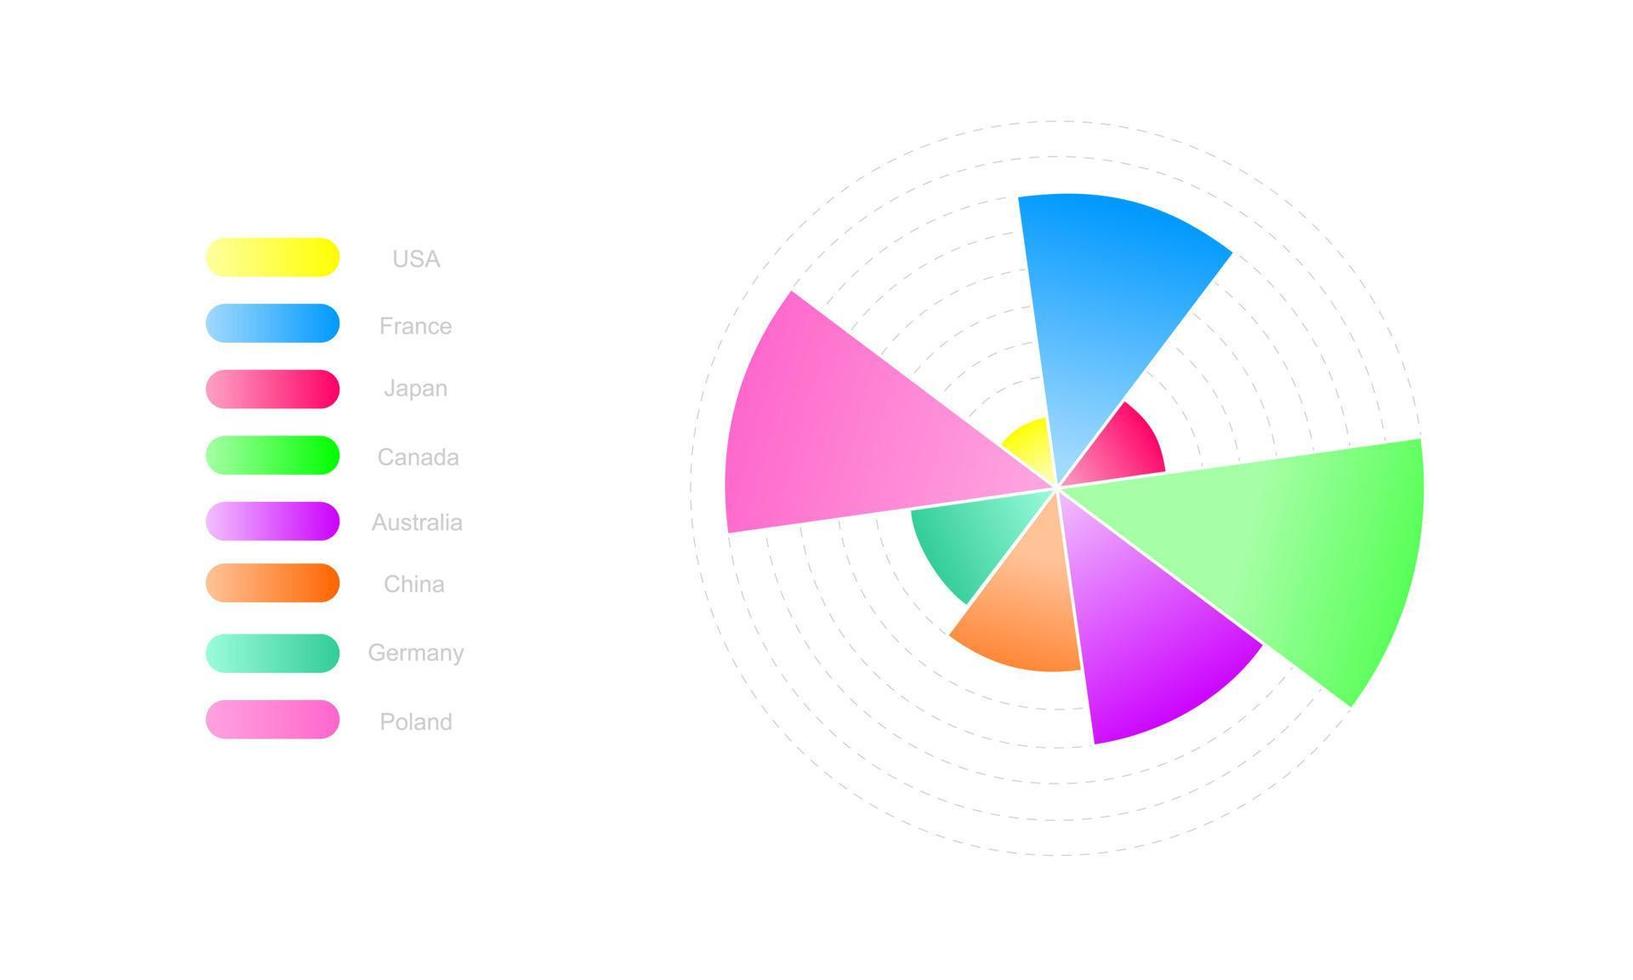 Circle chart template. Wheel diagram with 8 colorful segments of different sizes. Statistical data visualization layout. Business infographic design example vector